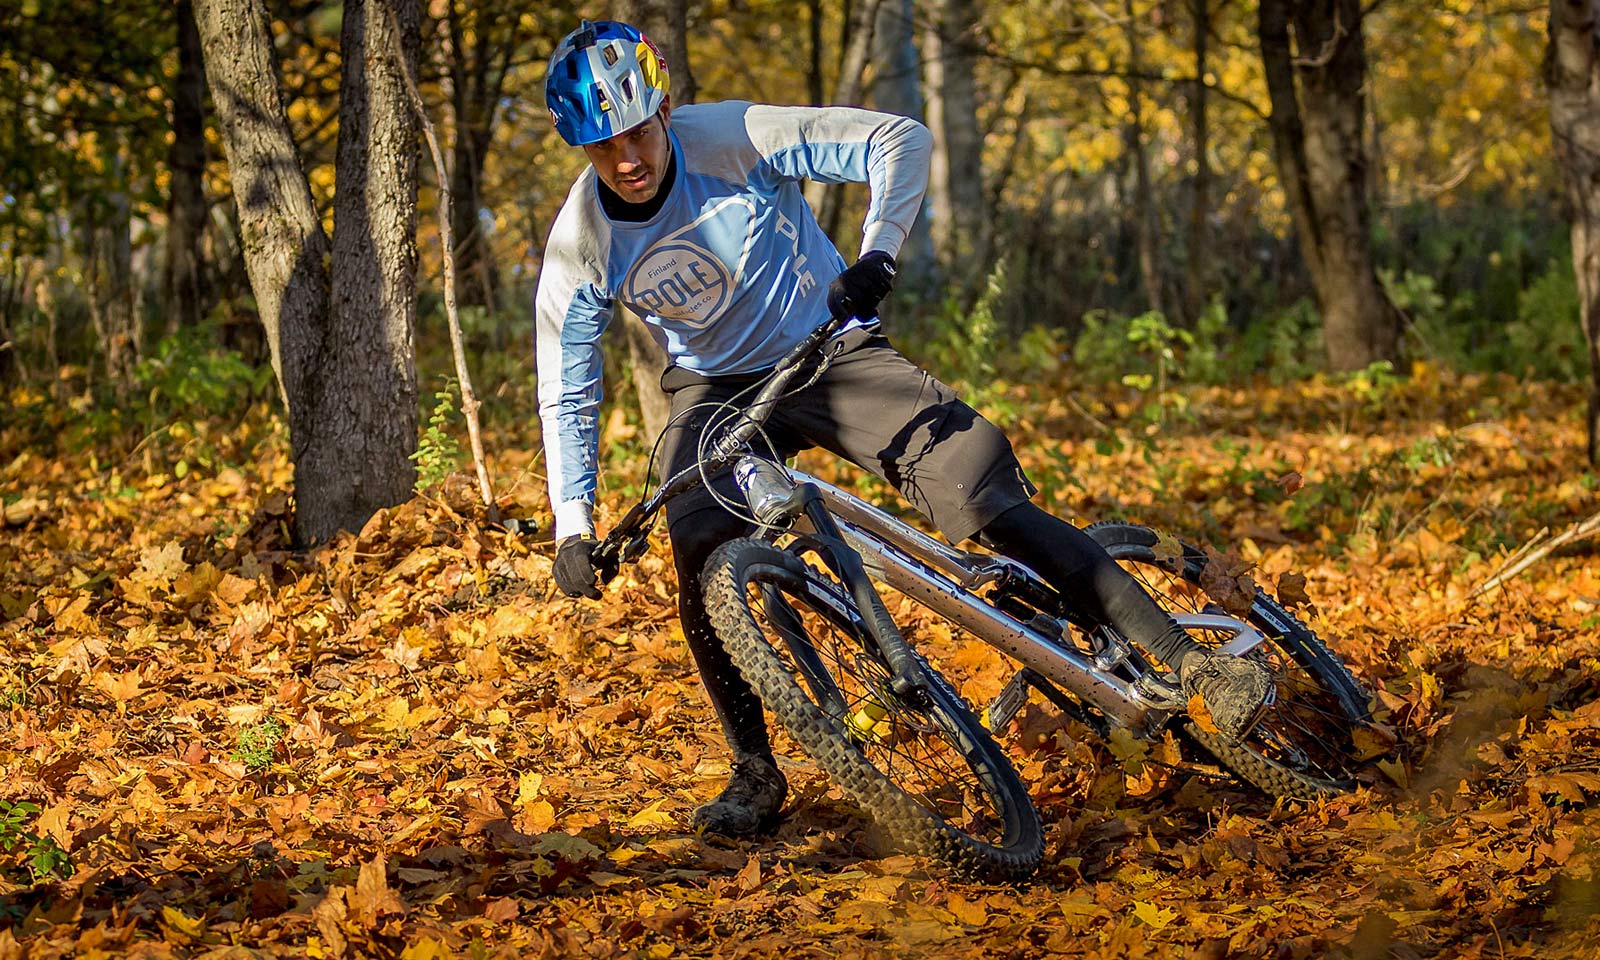 Pole Stamina rapid prototypes new gravity-inspired enduro race bike in just a month